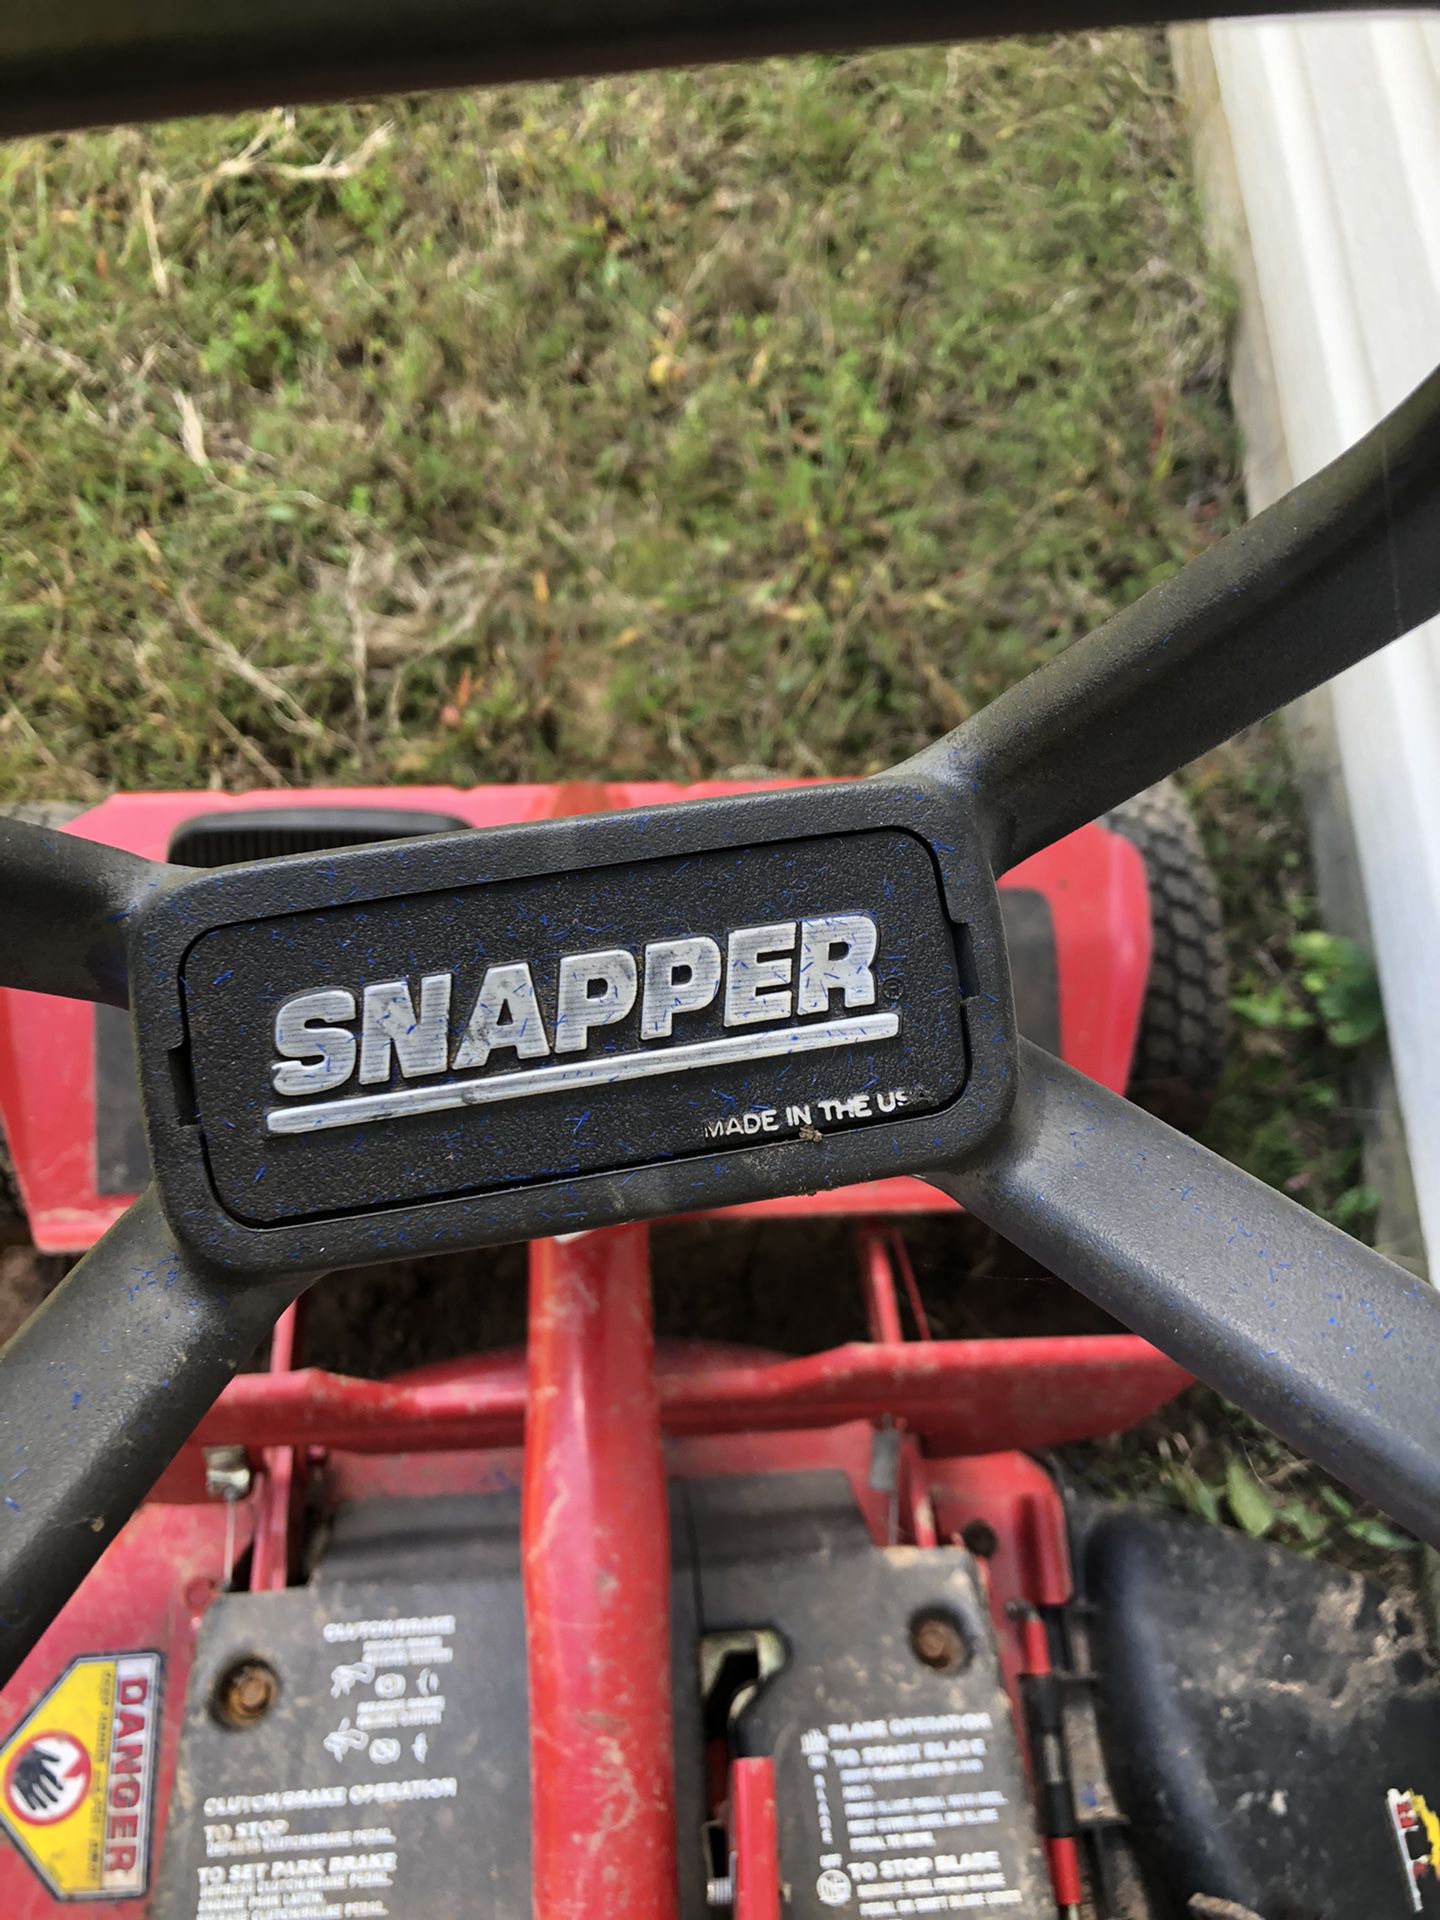 Snapper Riding Lawn Mower (Needs Fixing)